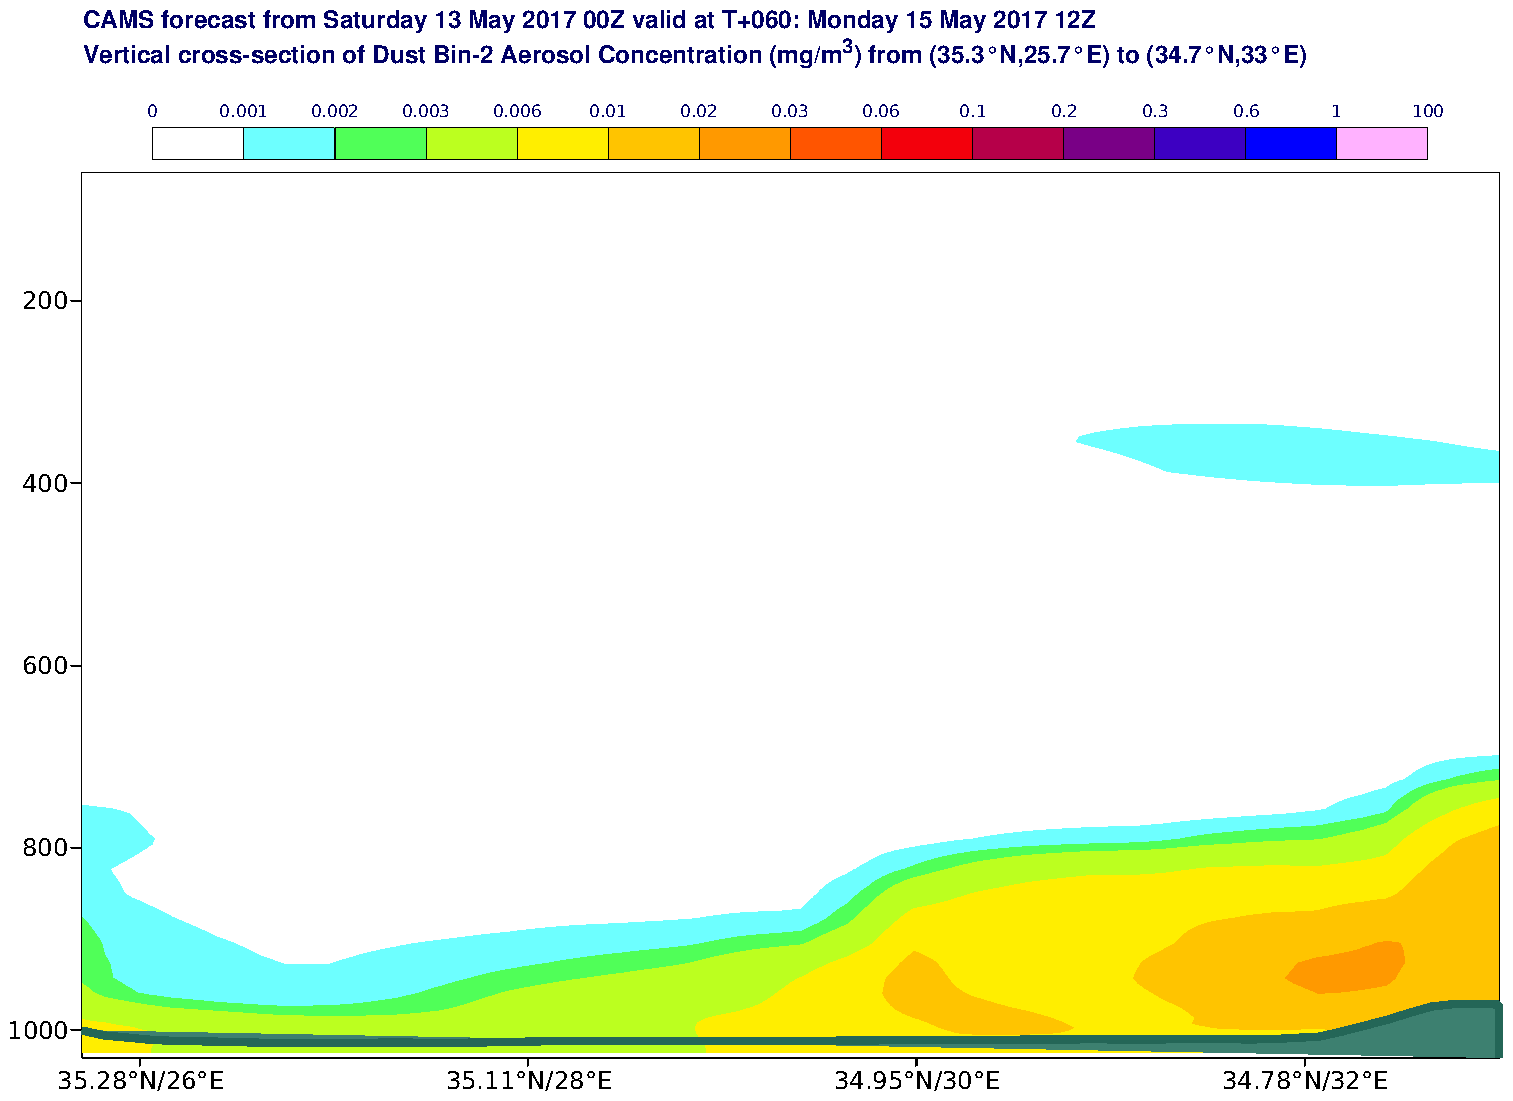 Vertical cross-section of Dust Bin-2 Aerosol Concentration (mg/m3) valid at T60 - 2017-05-15 12:00